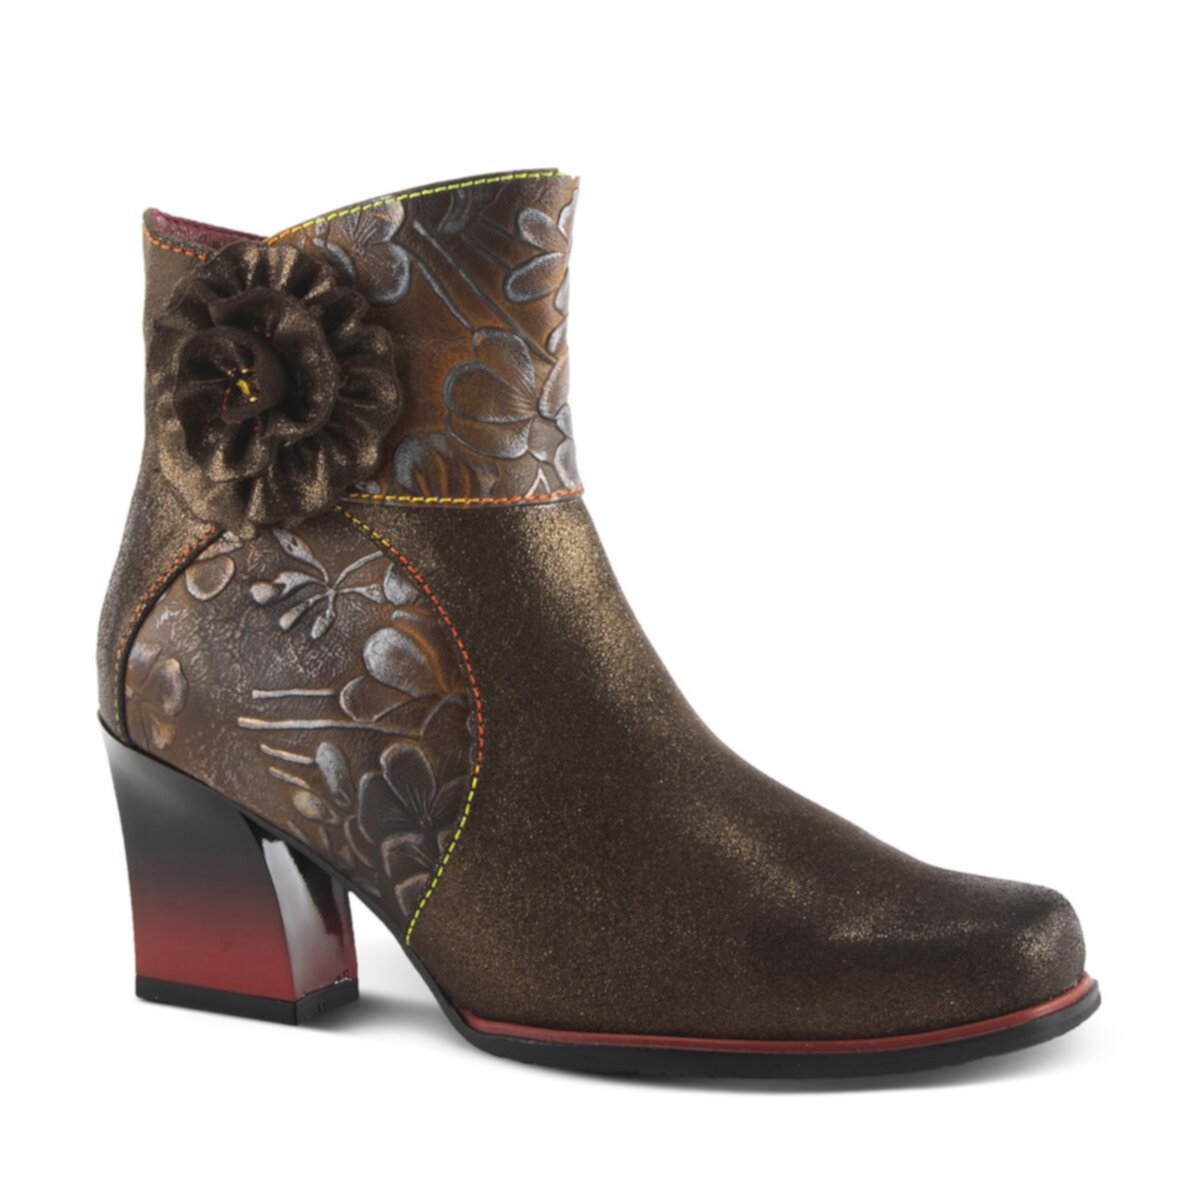 L'Artiste By Spring Step Zinna Leather Ankle Boots L'ARTISTE